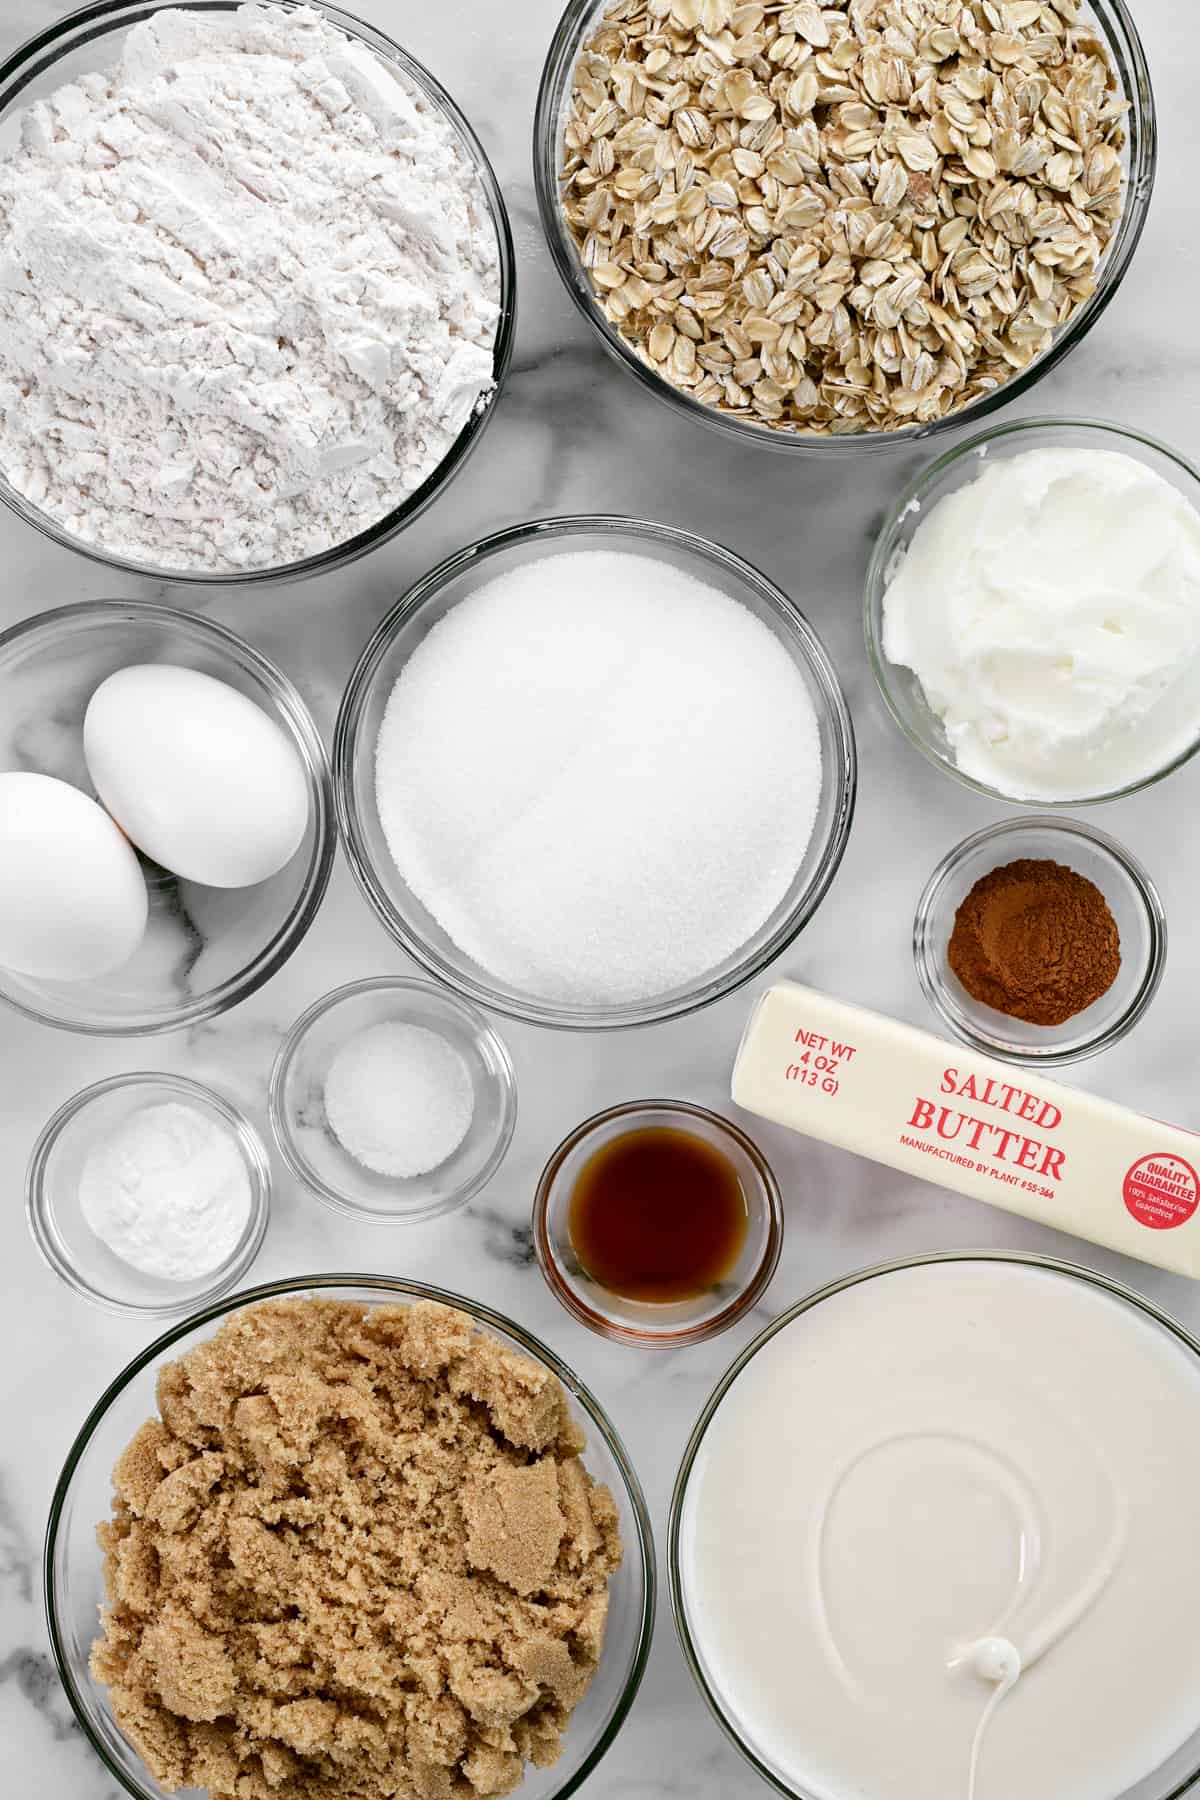 ingredients in bowls on a marble countertop.